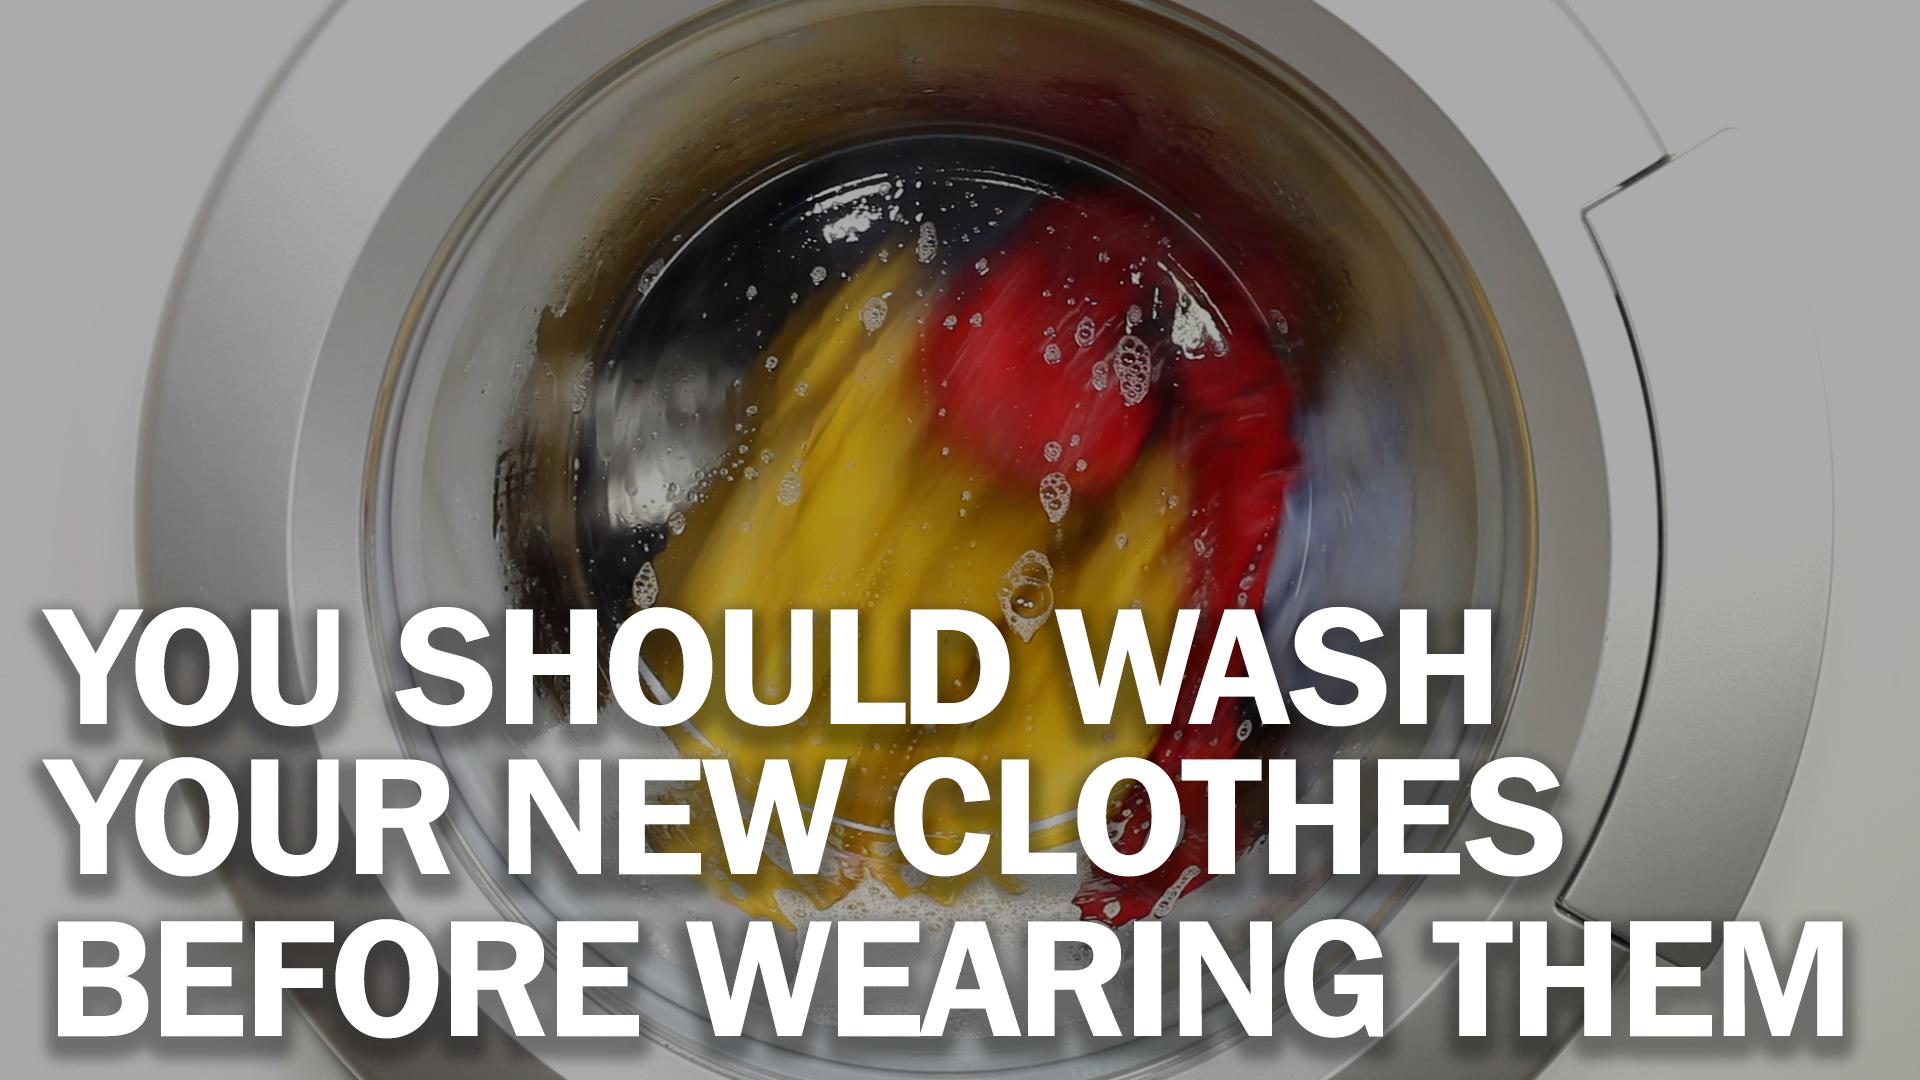 Should You Wash New Clothes Before You Wear Them?